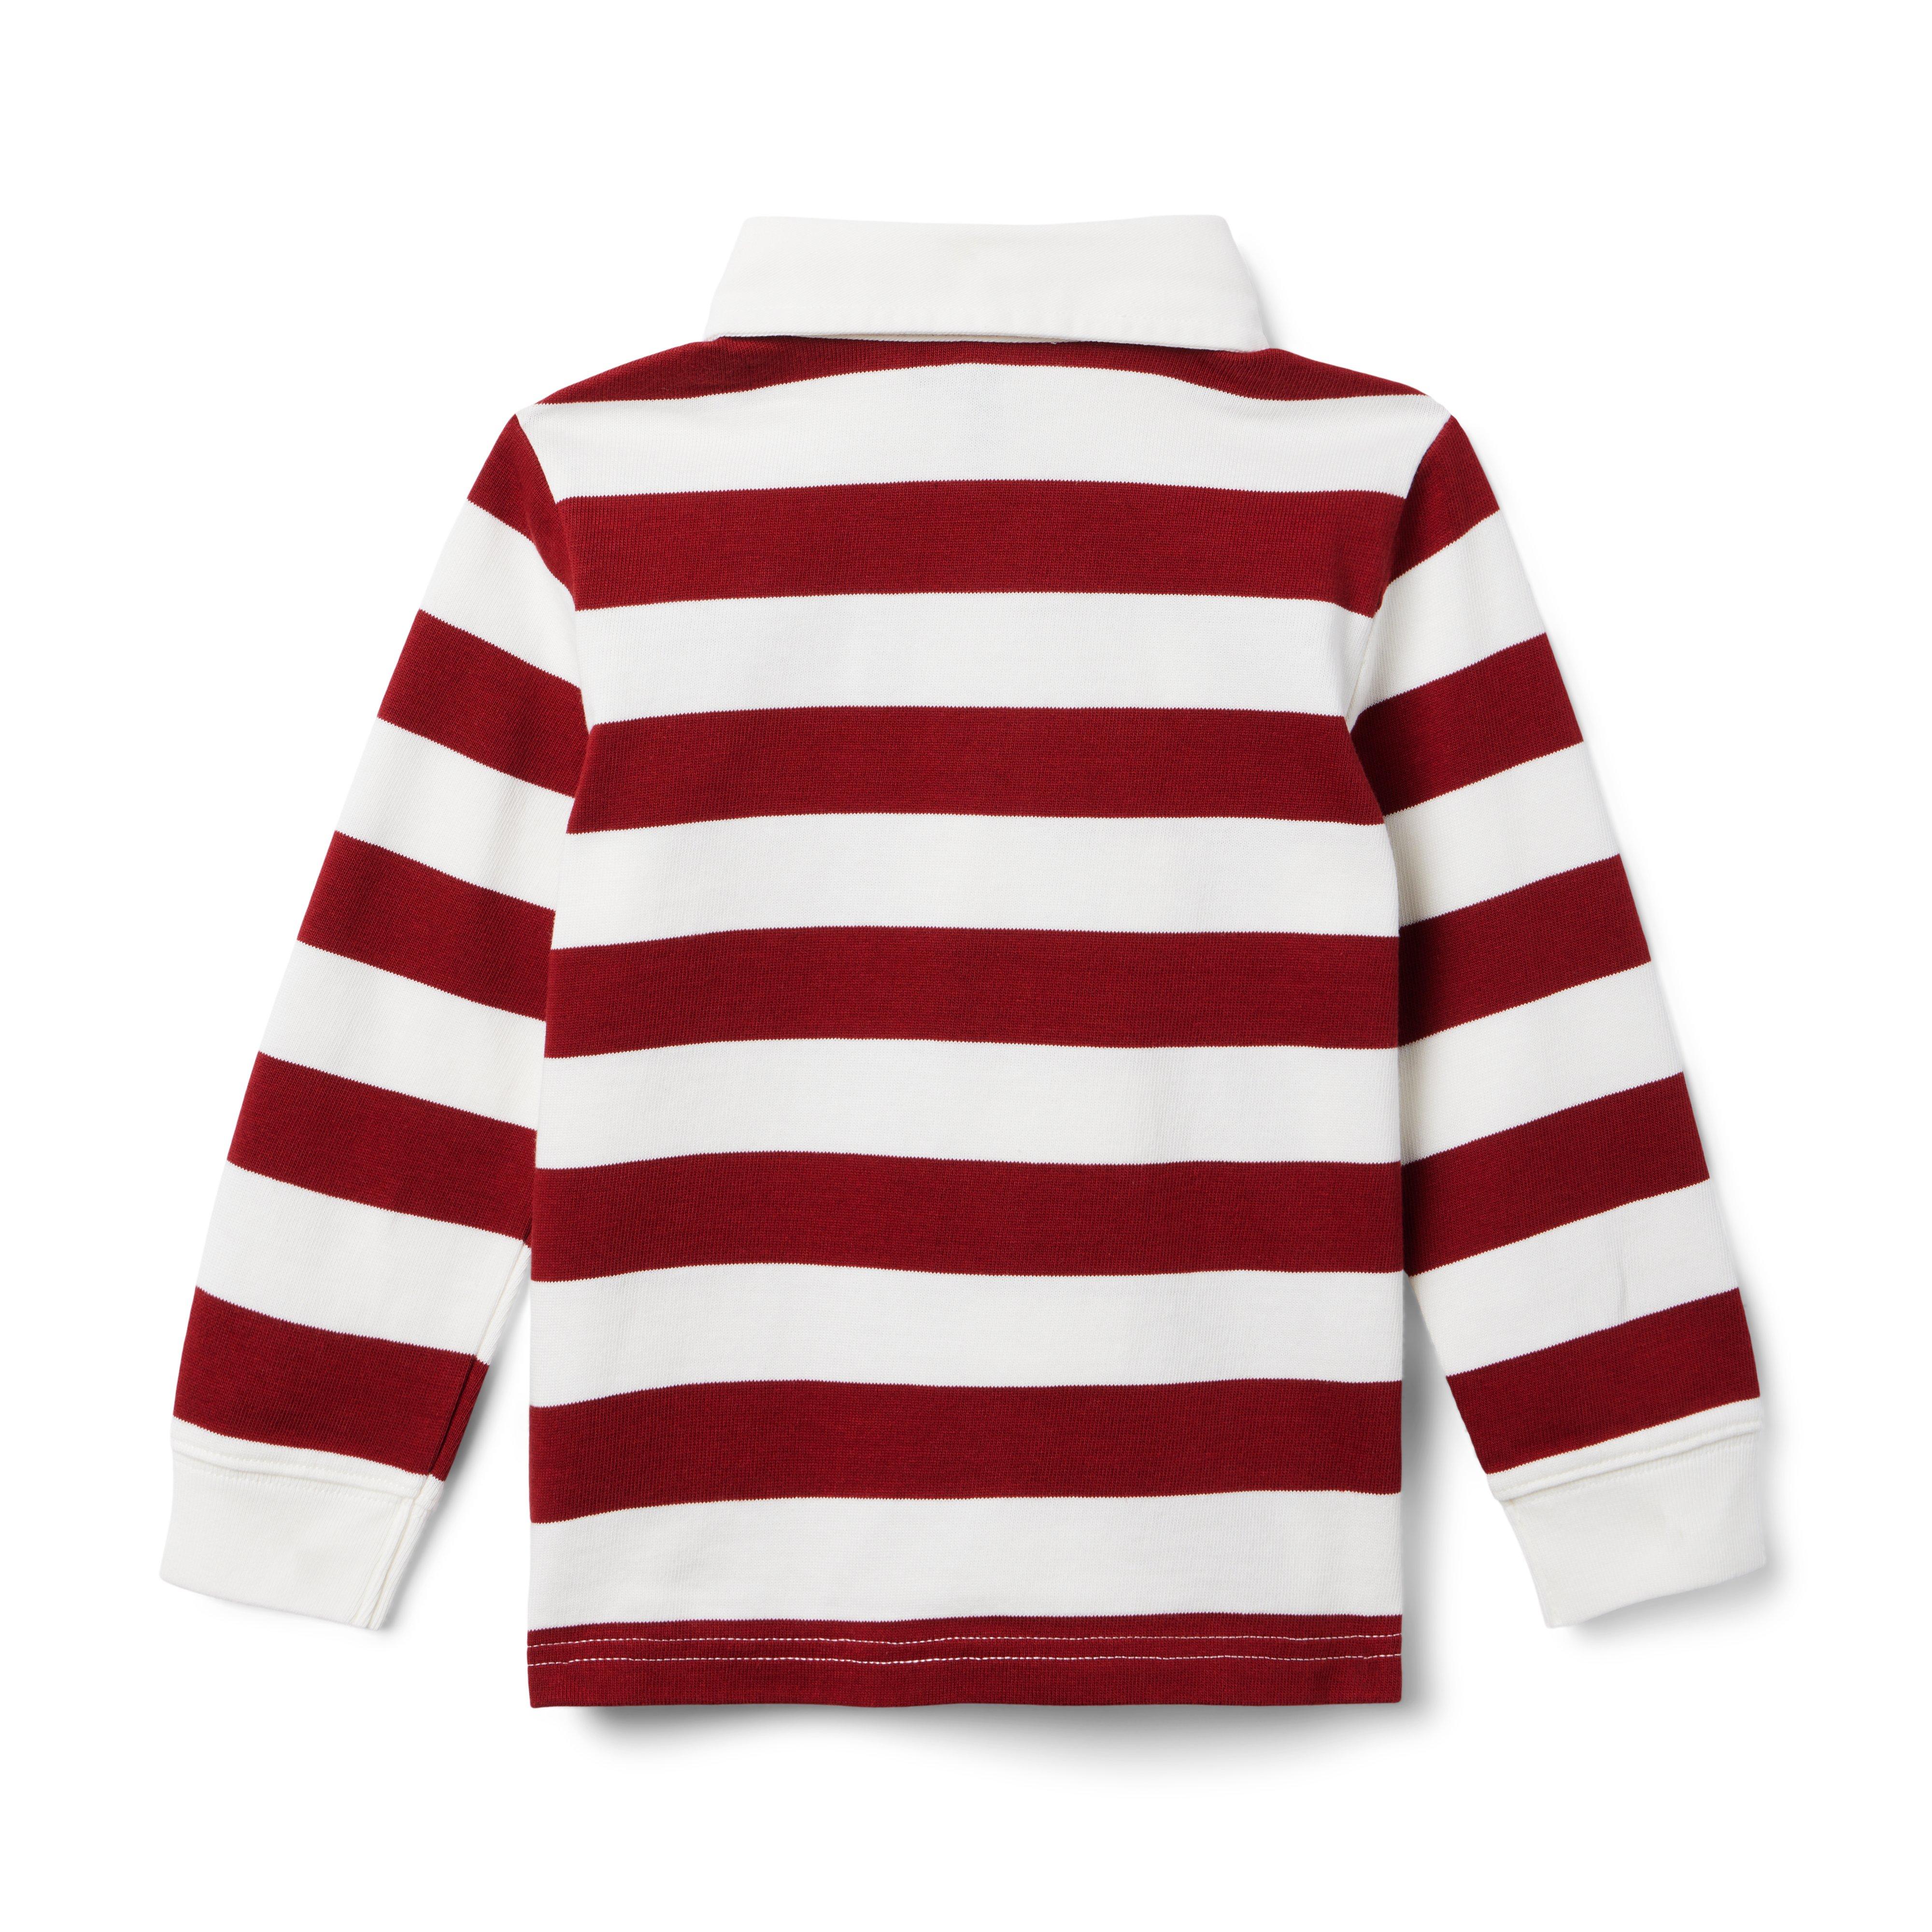 Striped Rugby Shirt image number 4